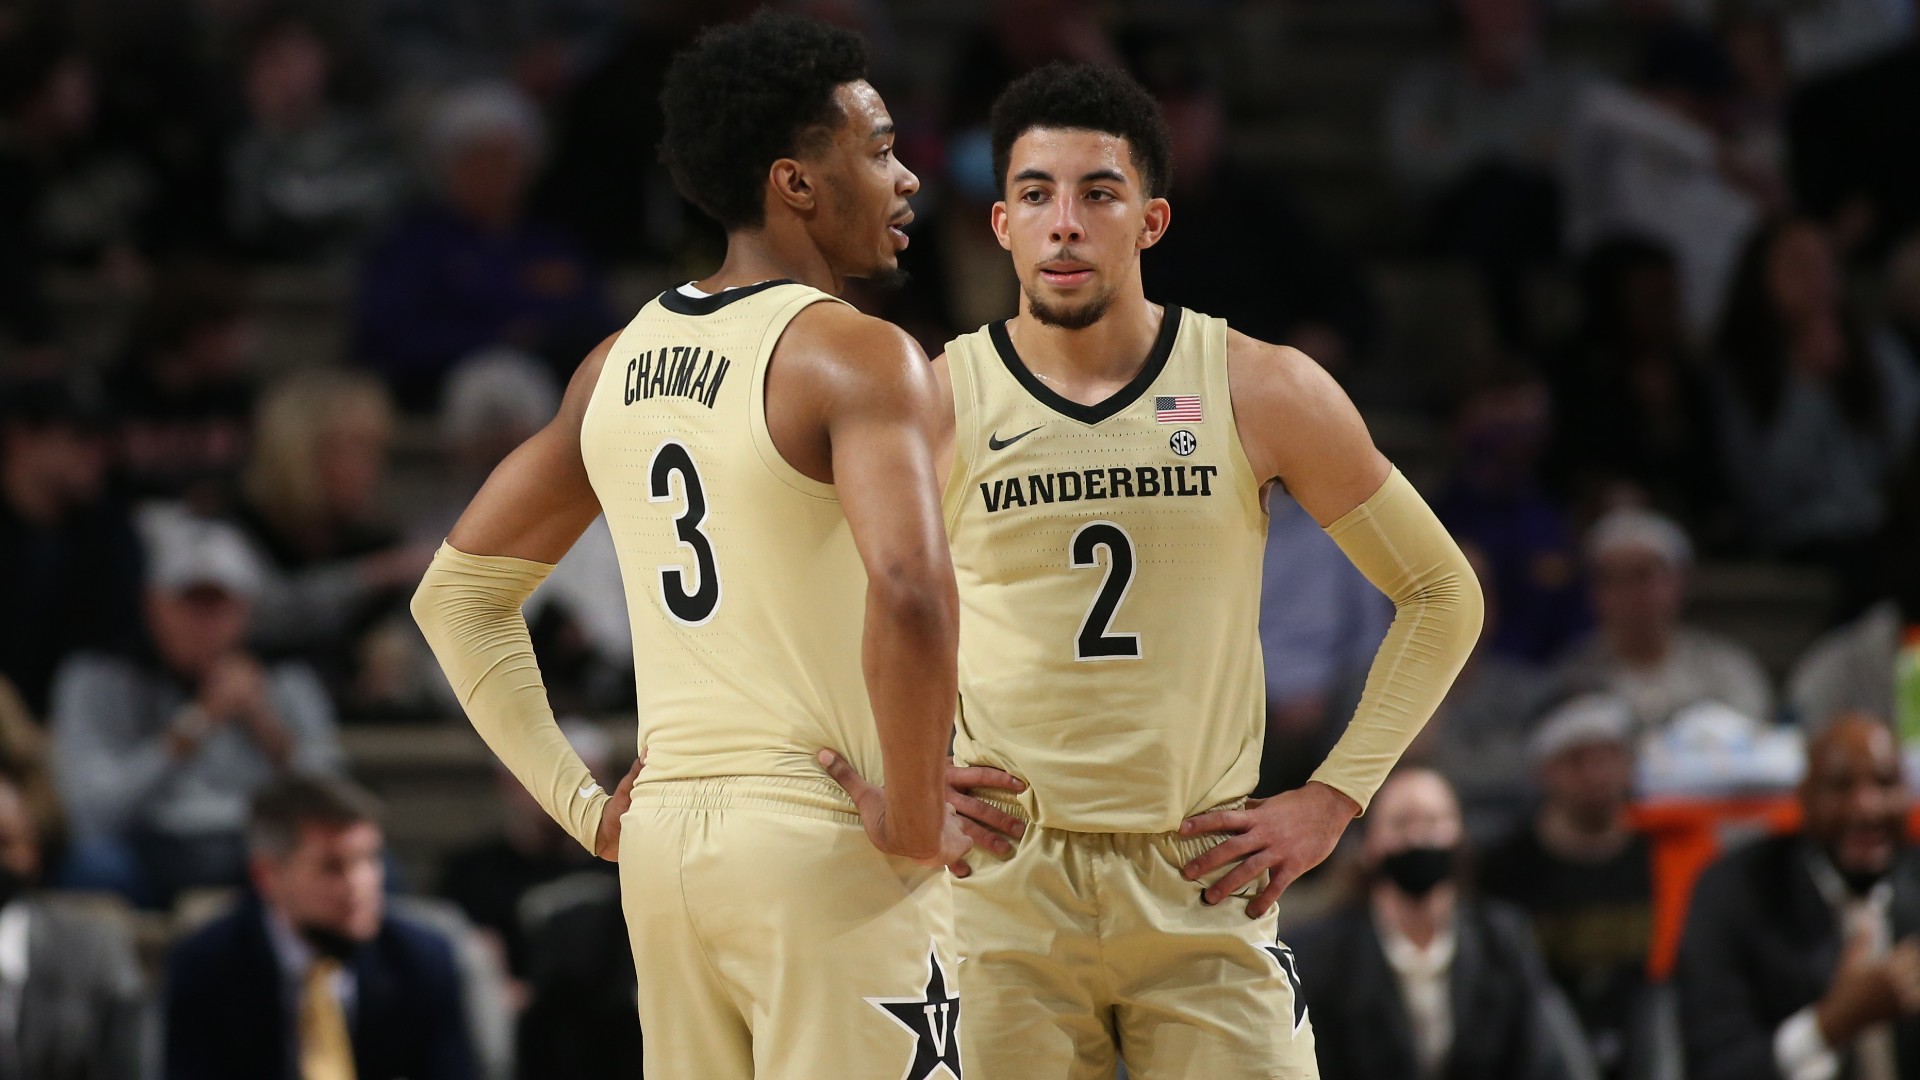 College Basketball Odds & Picks: Our Staff’s 4 Best Bets for Tuesday, Including Missouri vs. Vanderbilt article feature image